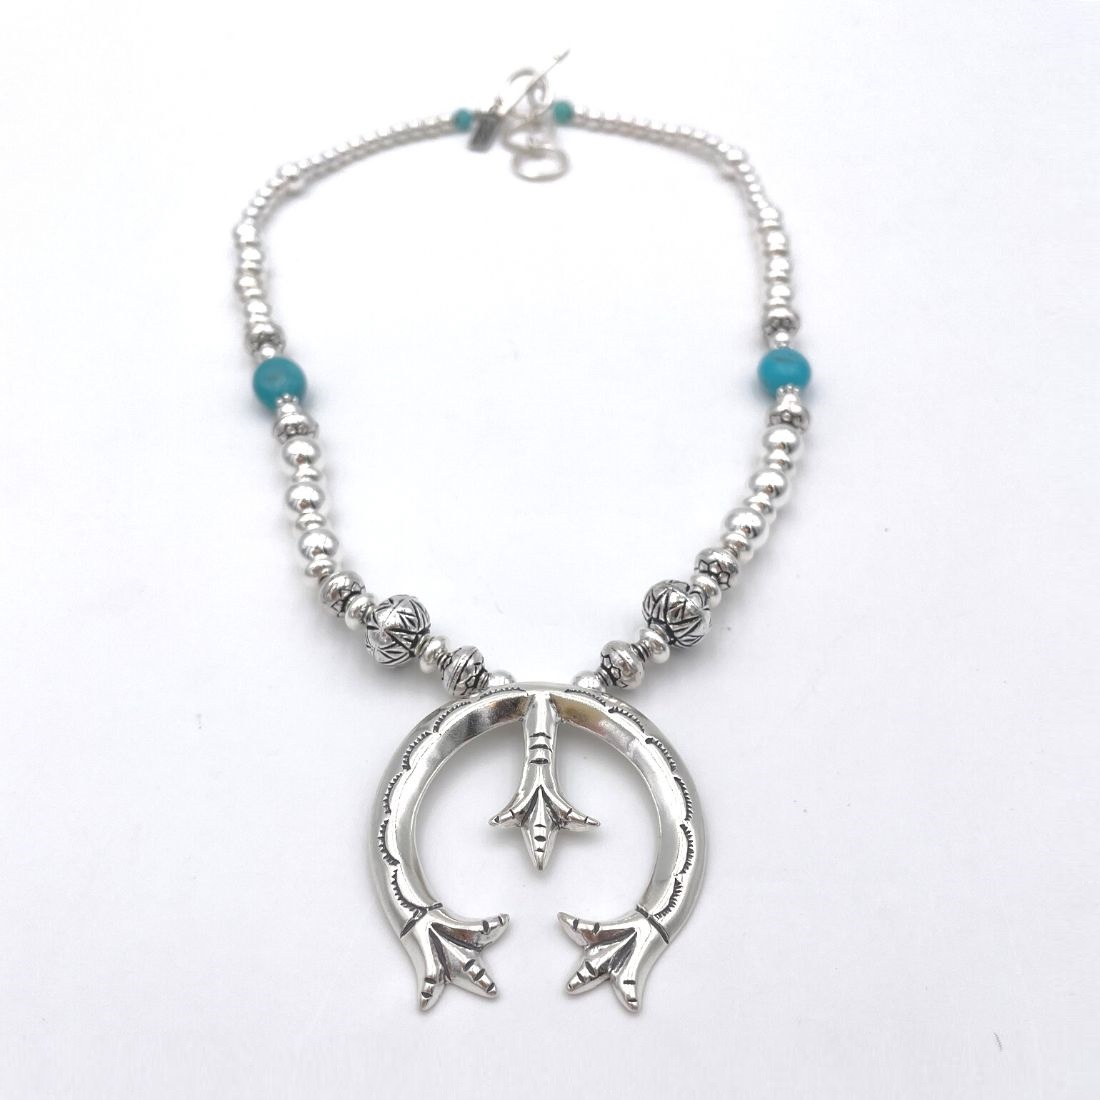 Turquoise and Naja Necklace by Paige Wallace